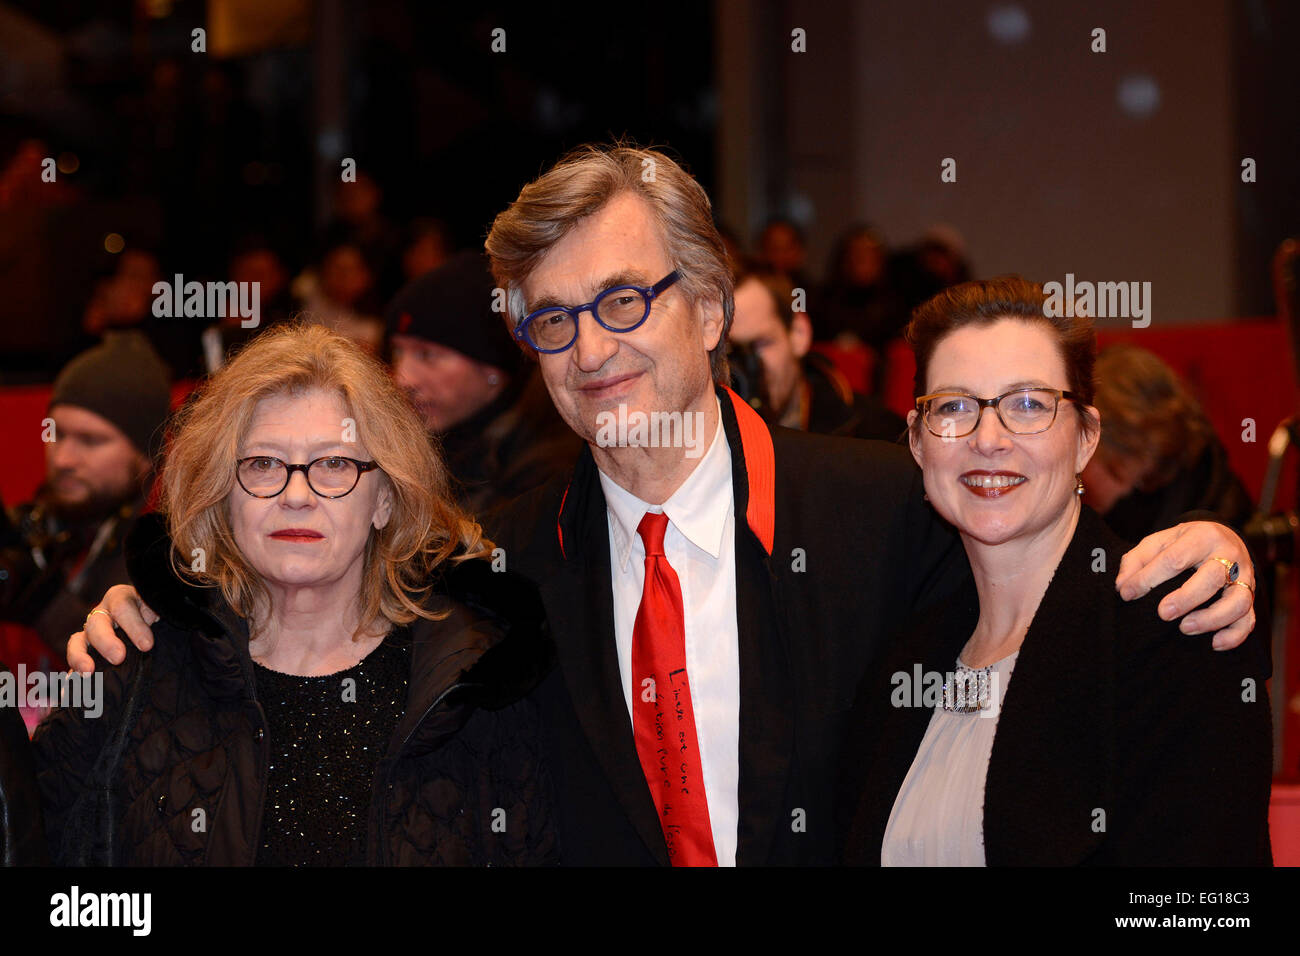 Lisa Kreuzer, Wim Wenders and Yella Rottländer attending the Honorary Golden Bear Award 2015 at the 65th Berlin International Film Festival / Berlinale 2015 on February 12, 2015./picture alliance Stock Photo